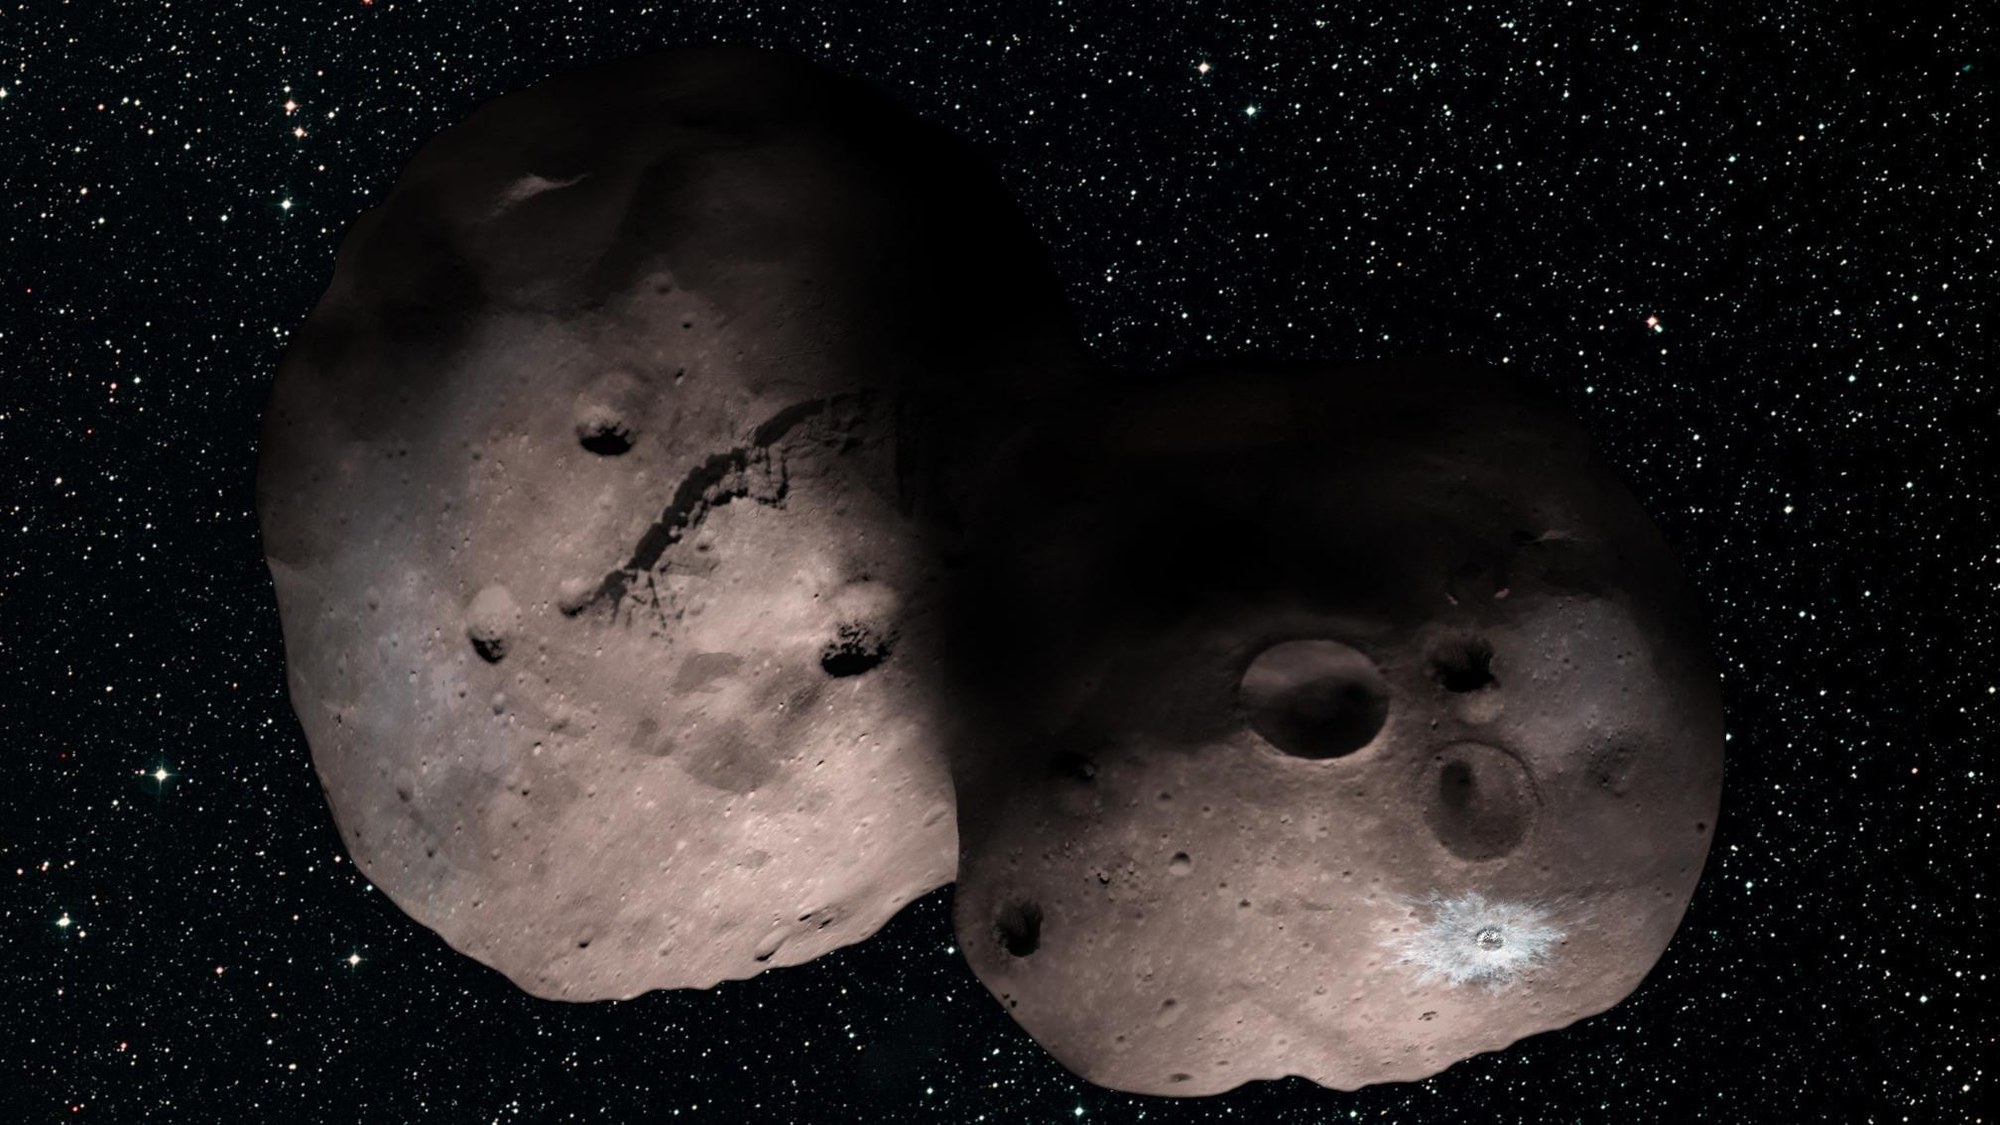 The idea of Ultima Thule being two bodies